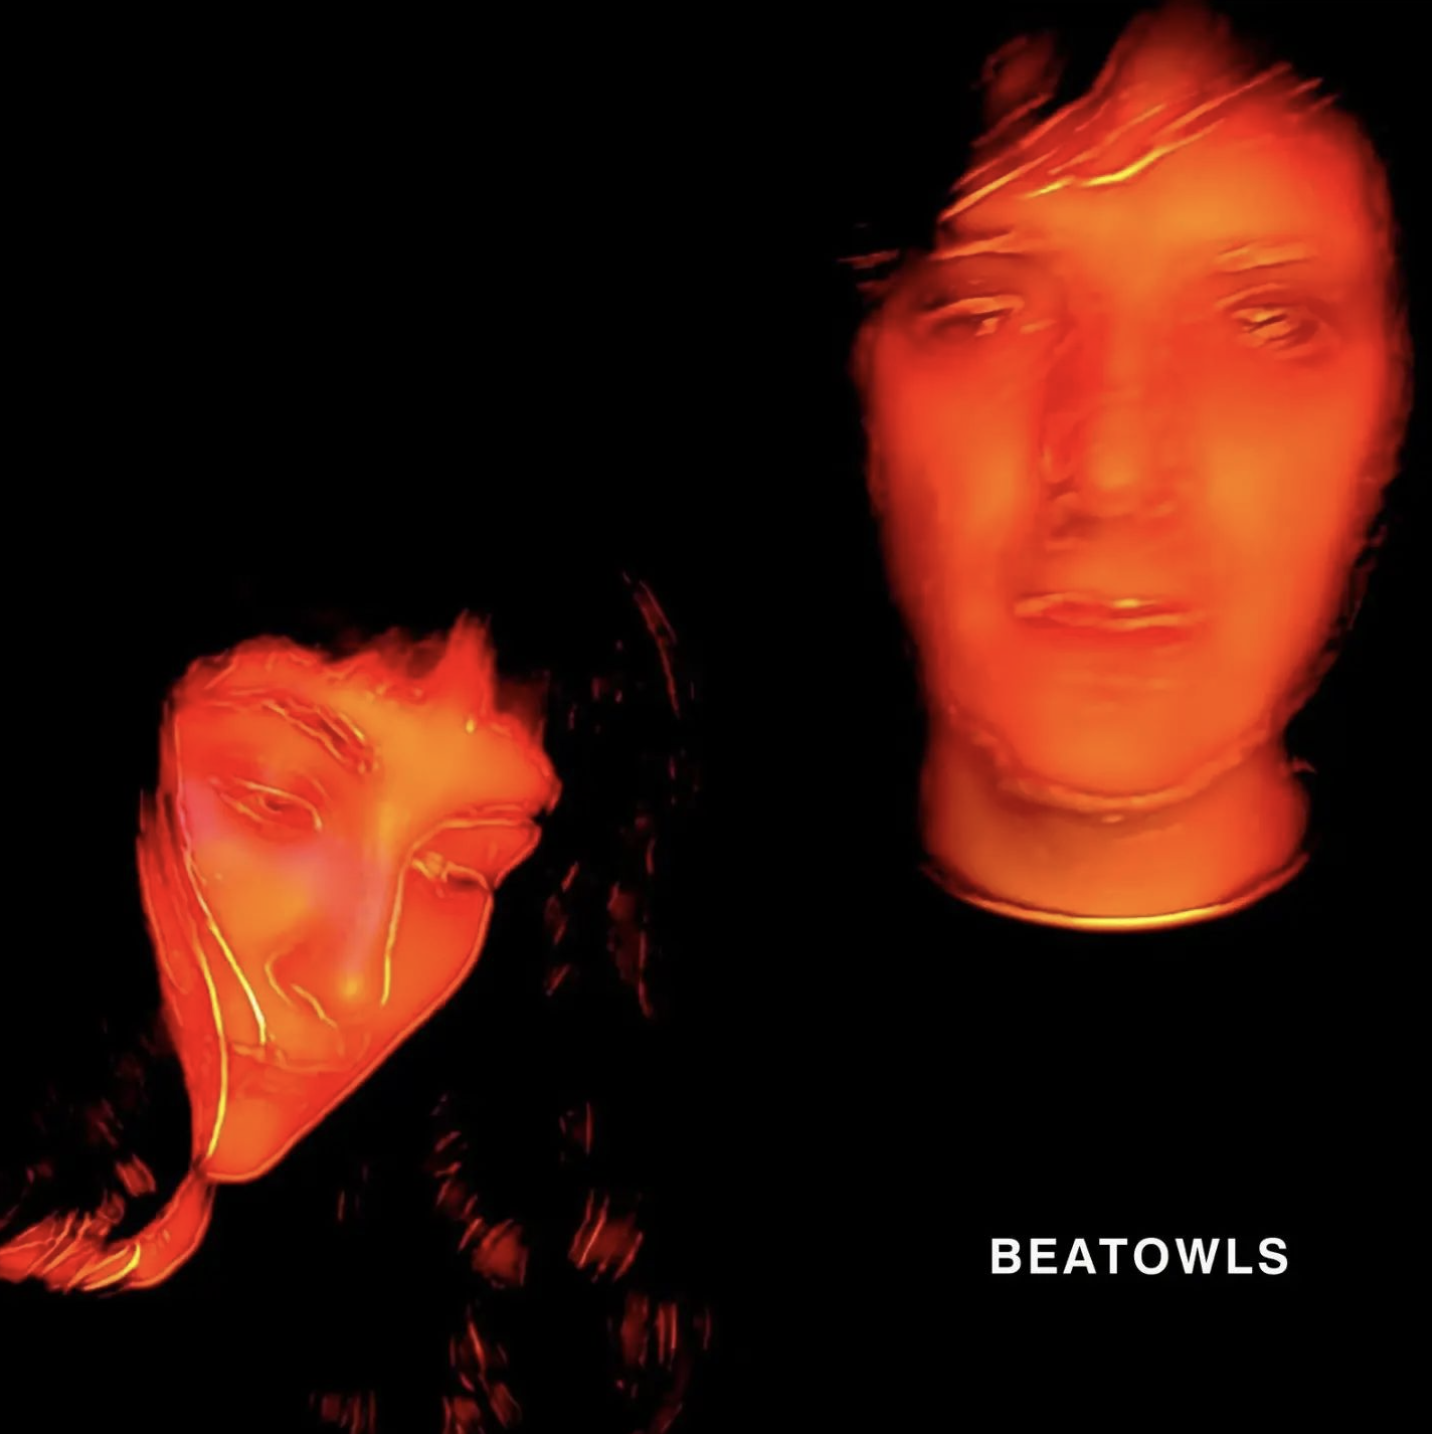 LISTEN: “All I See is Trouble” by Beatowls